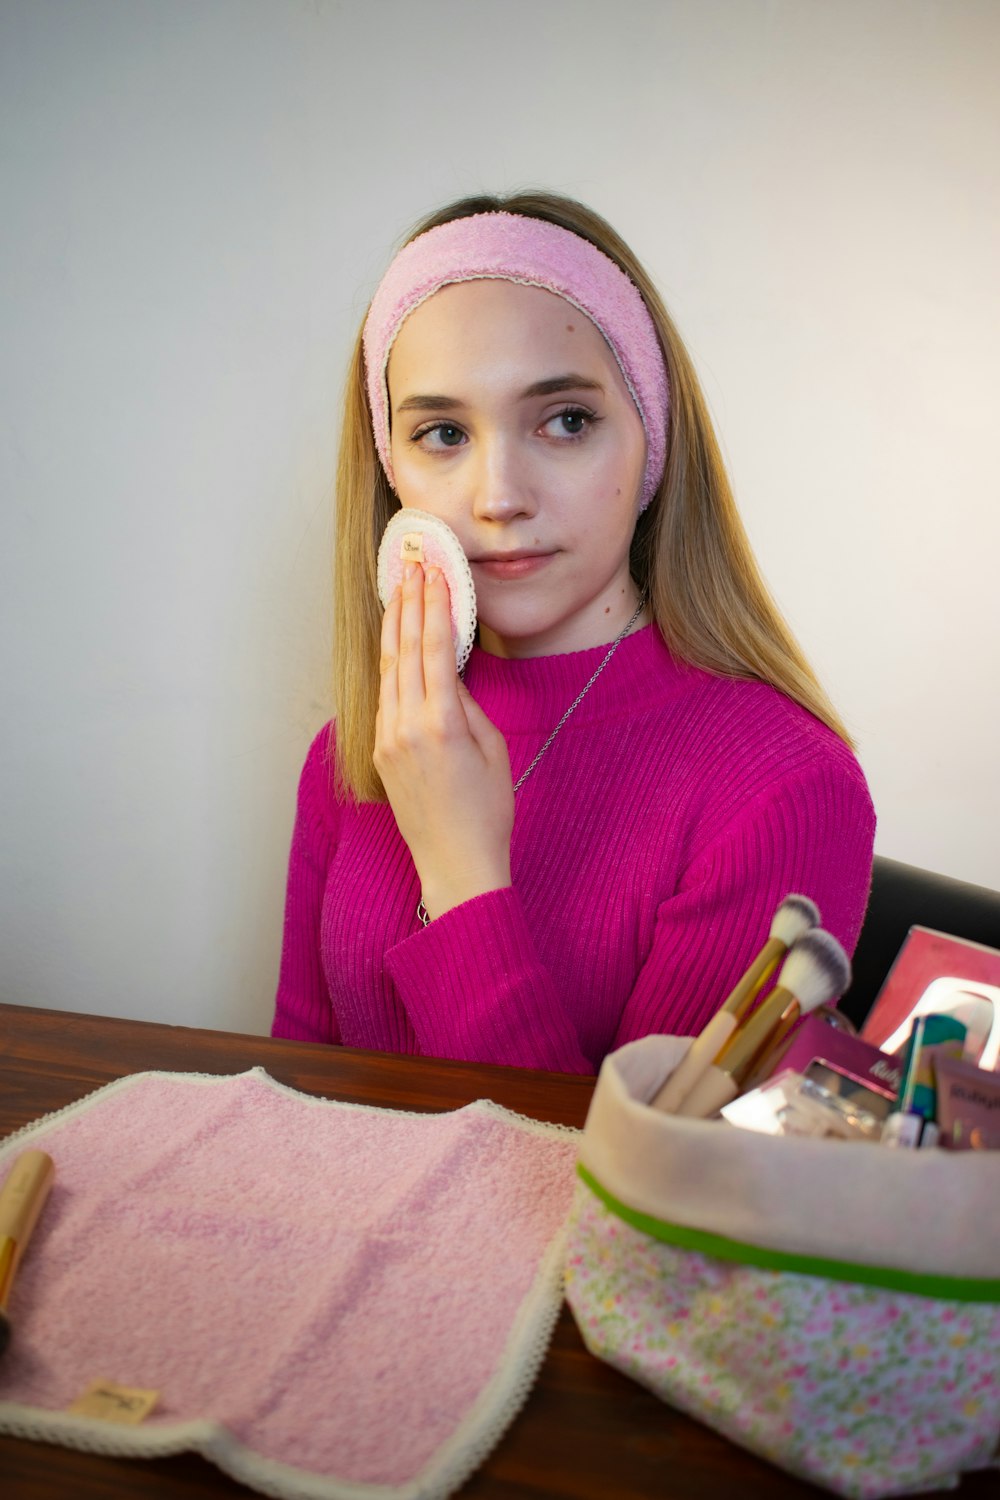 a girl in a pink sweater is holding a brush